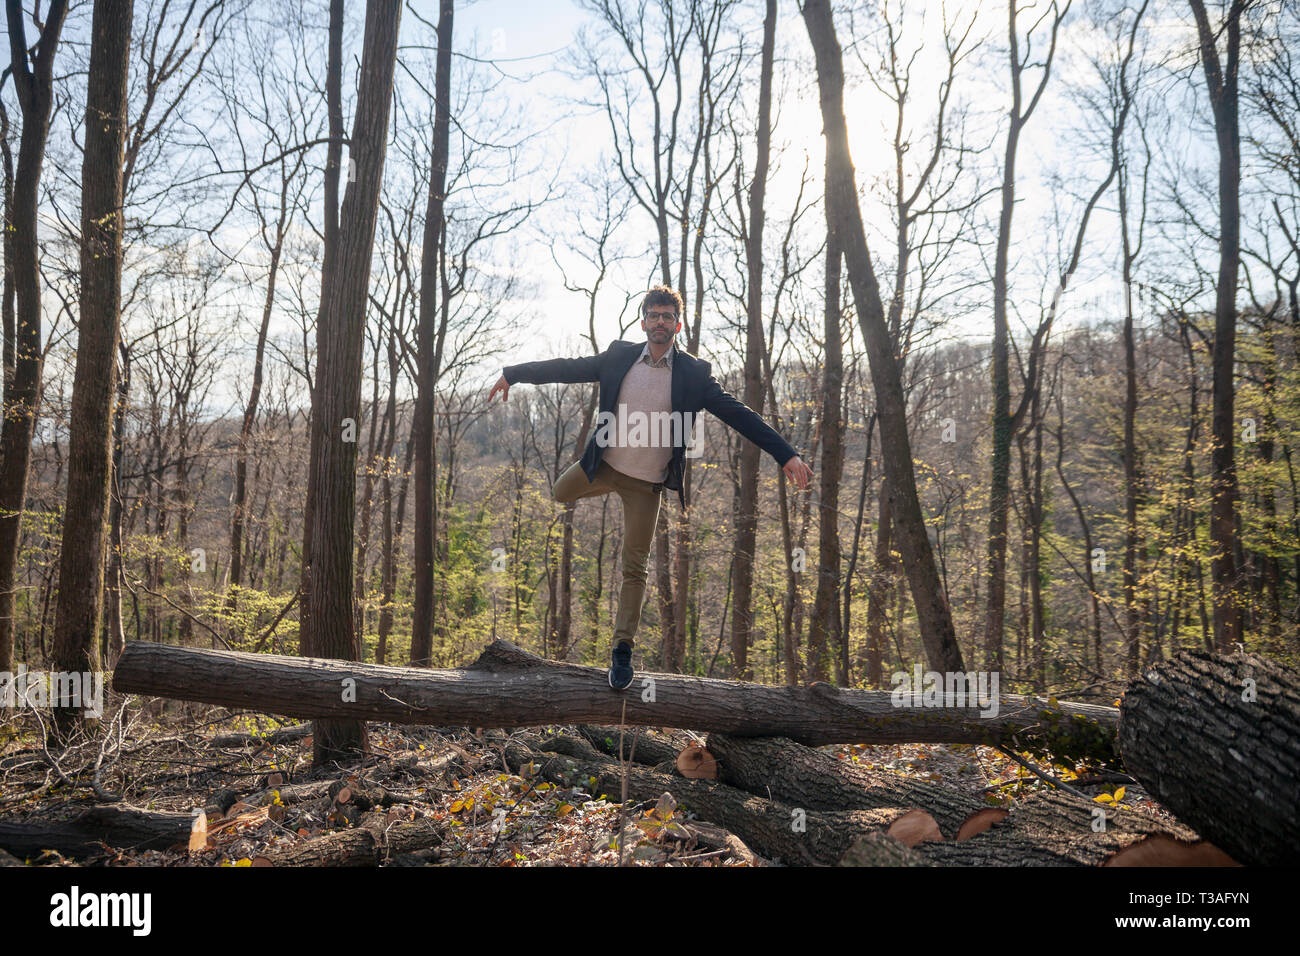 rear view, one man, dancer in smart casual clothing, doing ballet pose. outdoors in woods. Full lenght shot. Stock Photo